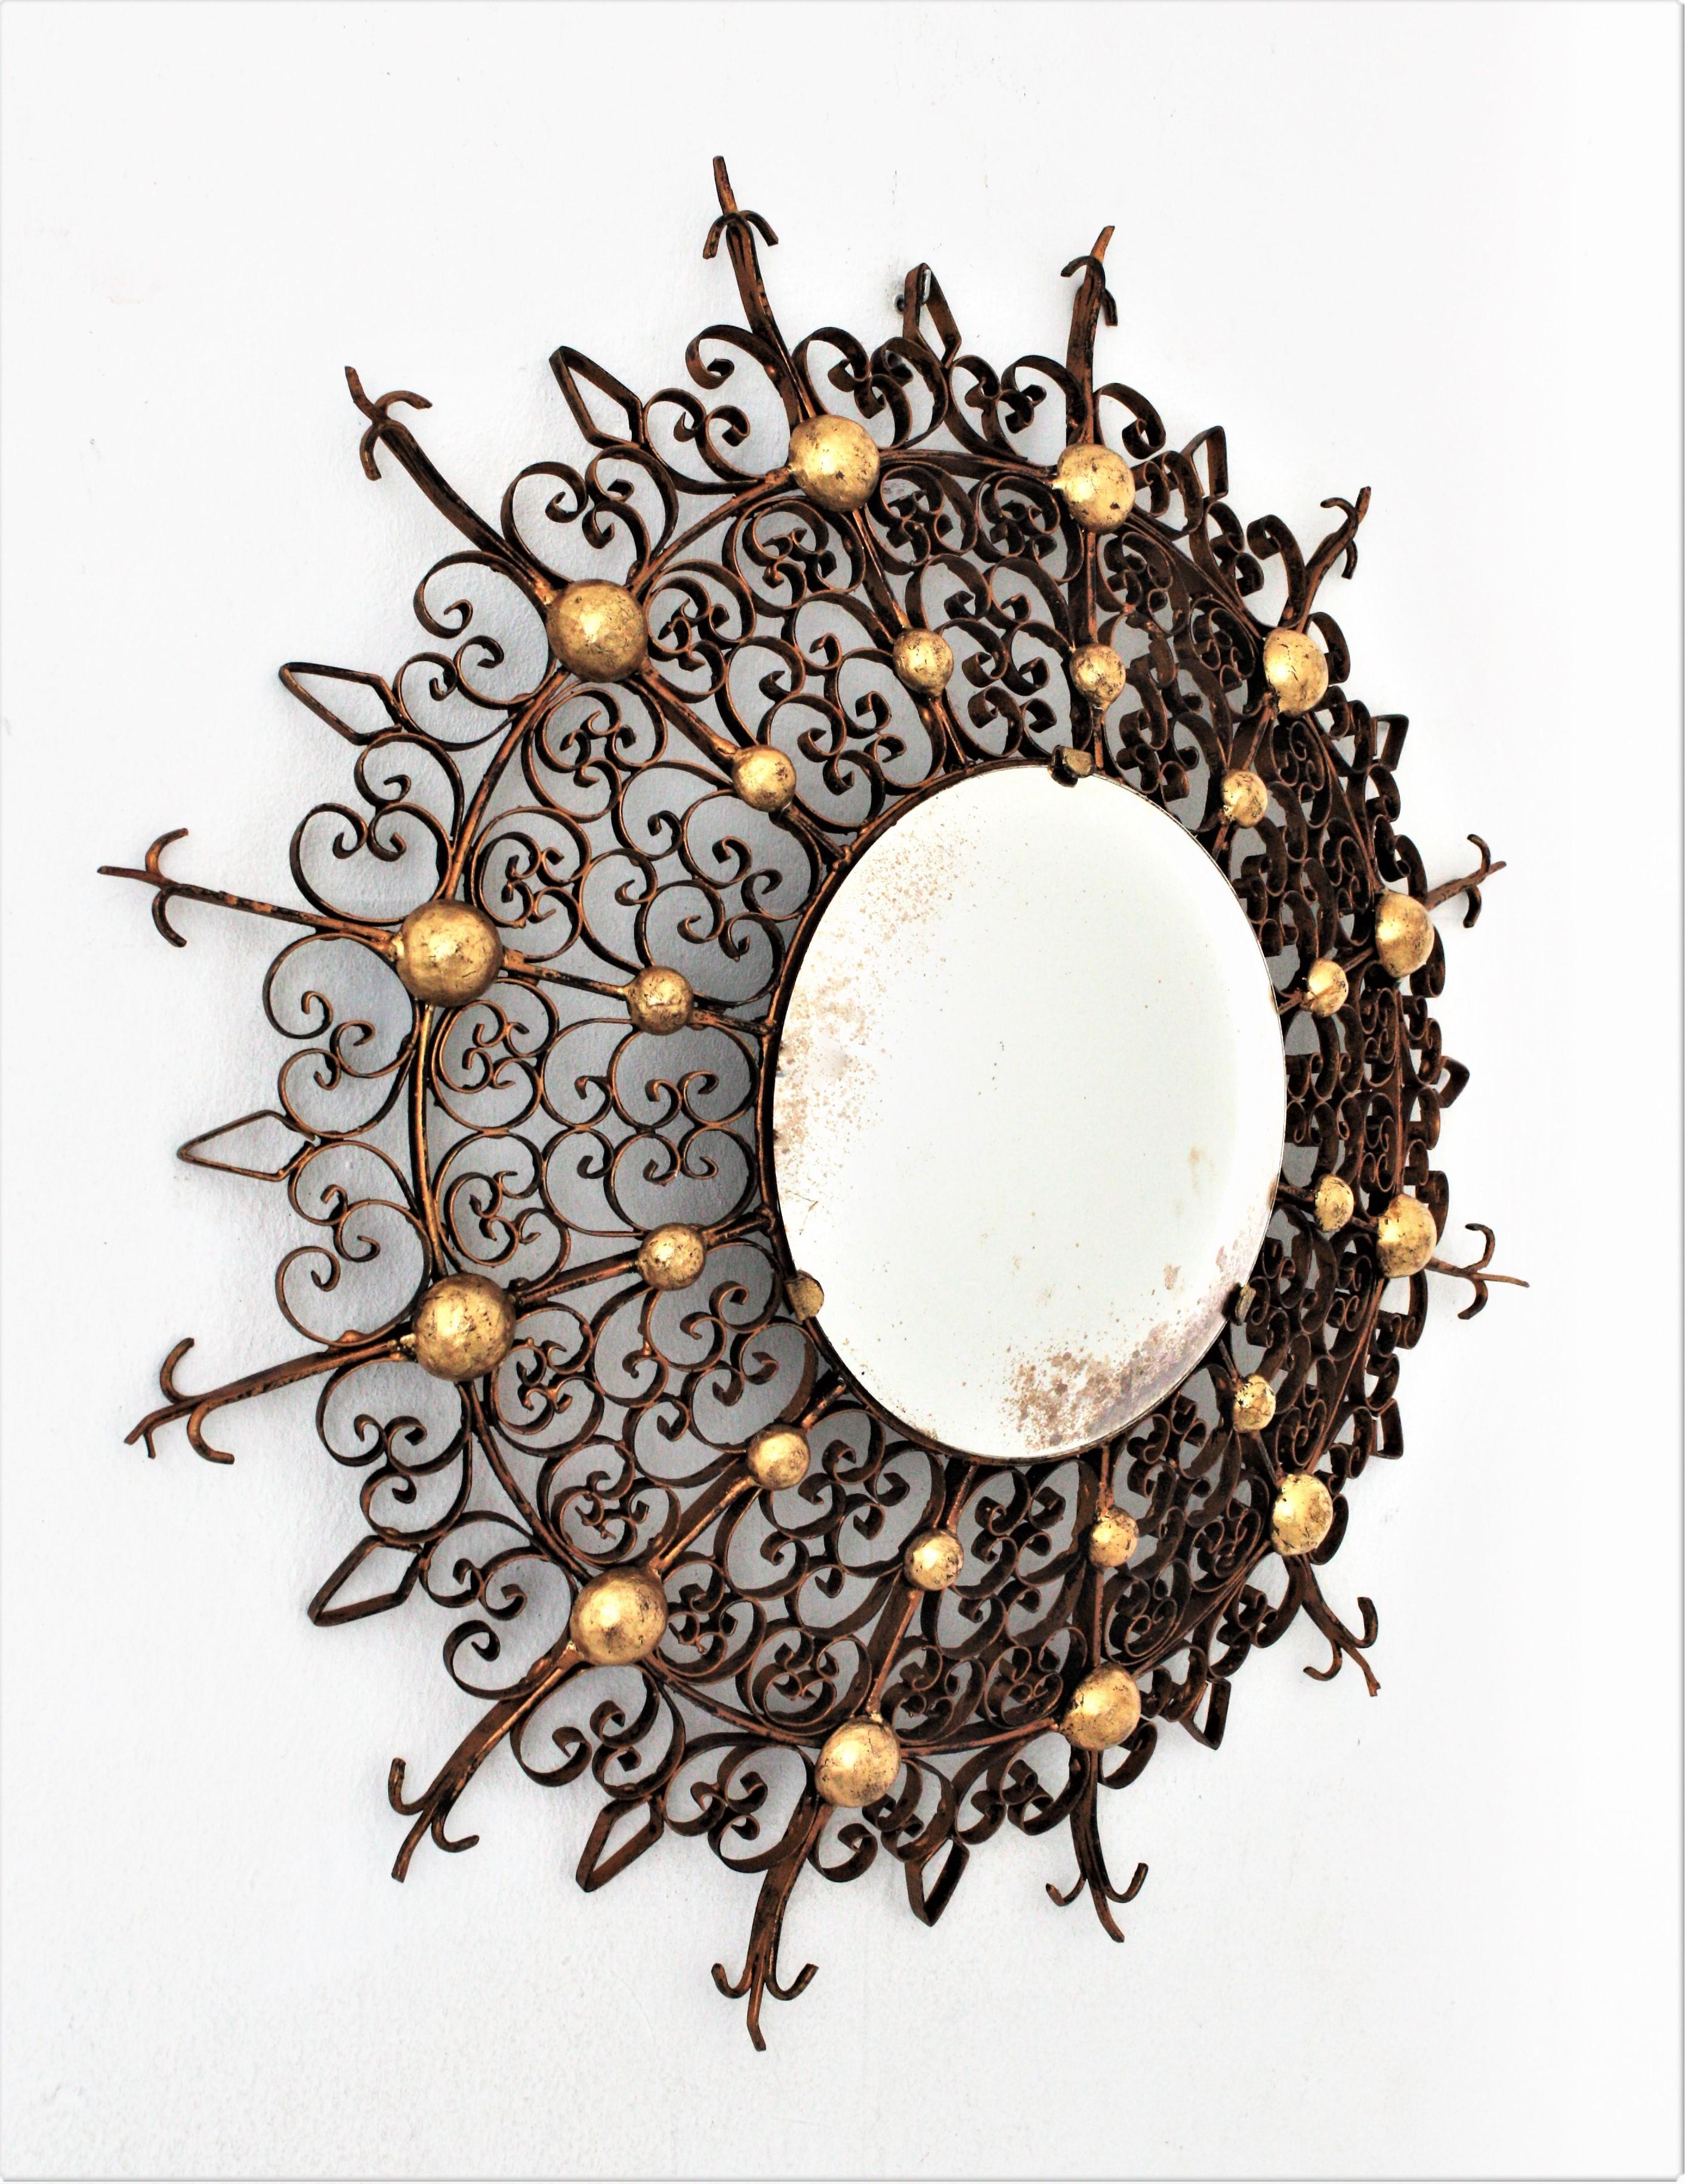 Impressive handcrafted Gothic Revival gilt iron sunburst convex mirror with scroll frame and gilt ball accents. France, 1930s.
The frame is an intricate filigree decoration with scrolls in diferent sizes accented by gold leaf gilt iron semi-spheres.